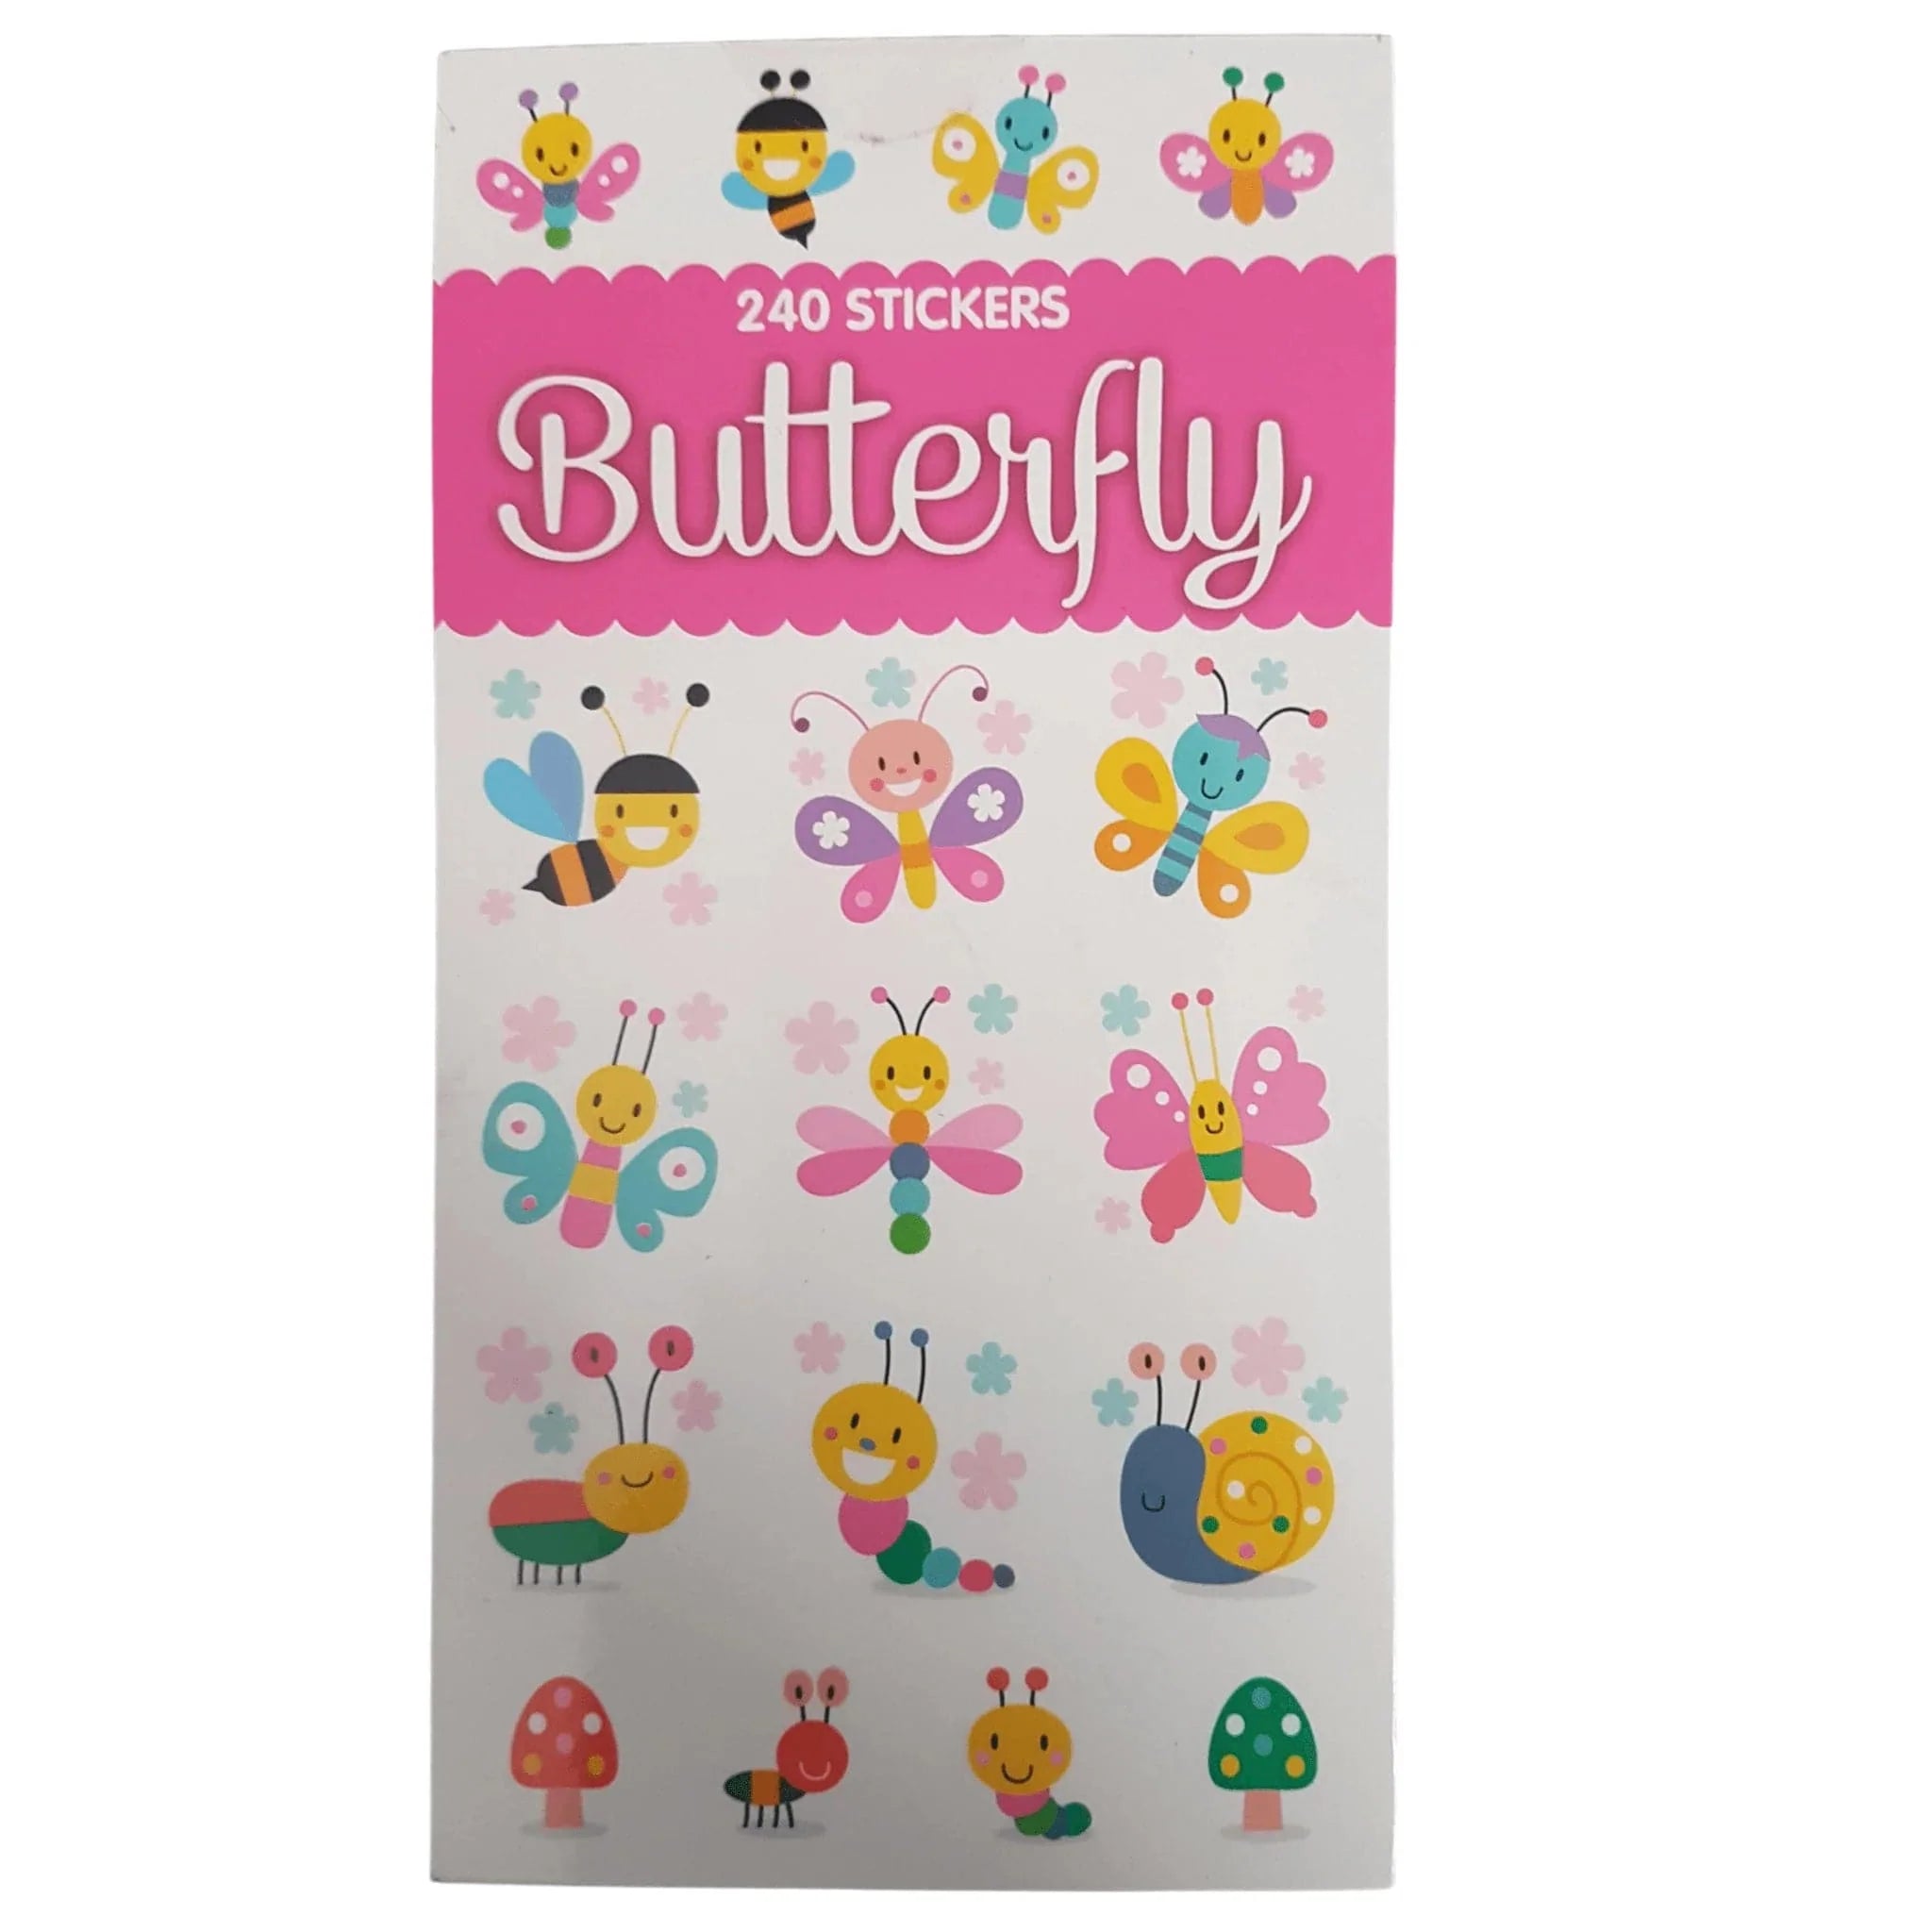 Butterfly Mini Sticker Book 12 Sheets - Kids Party Craft